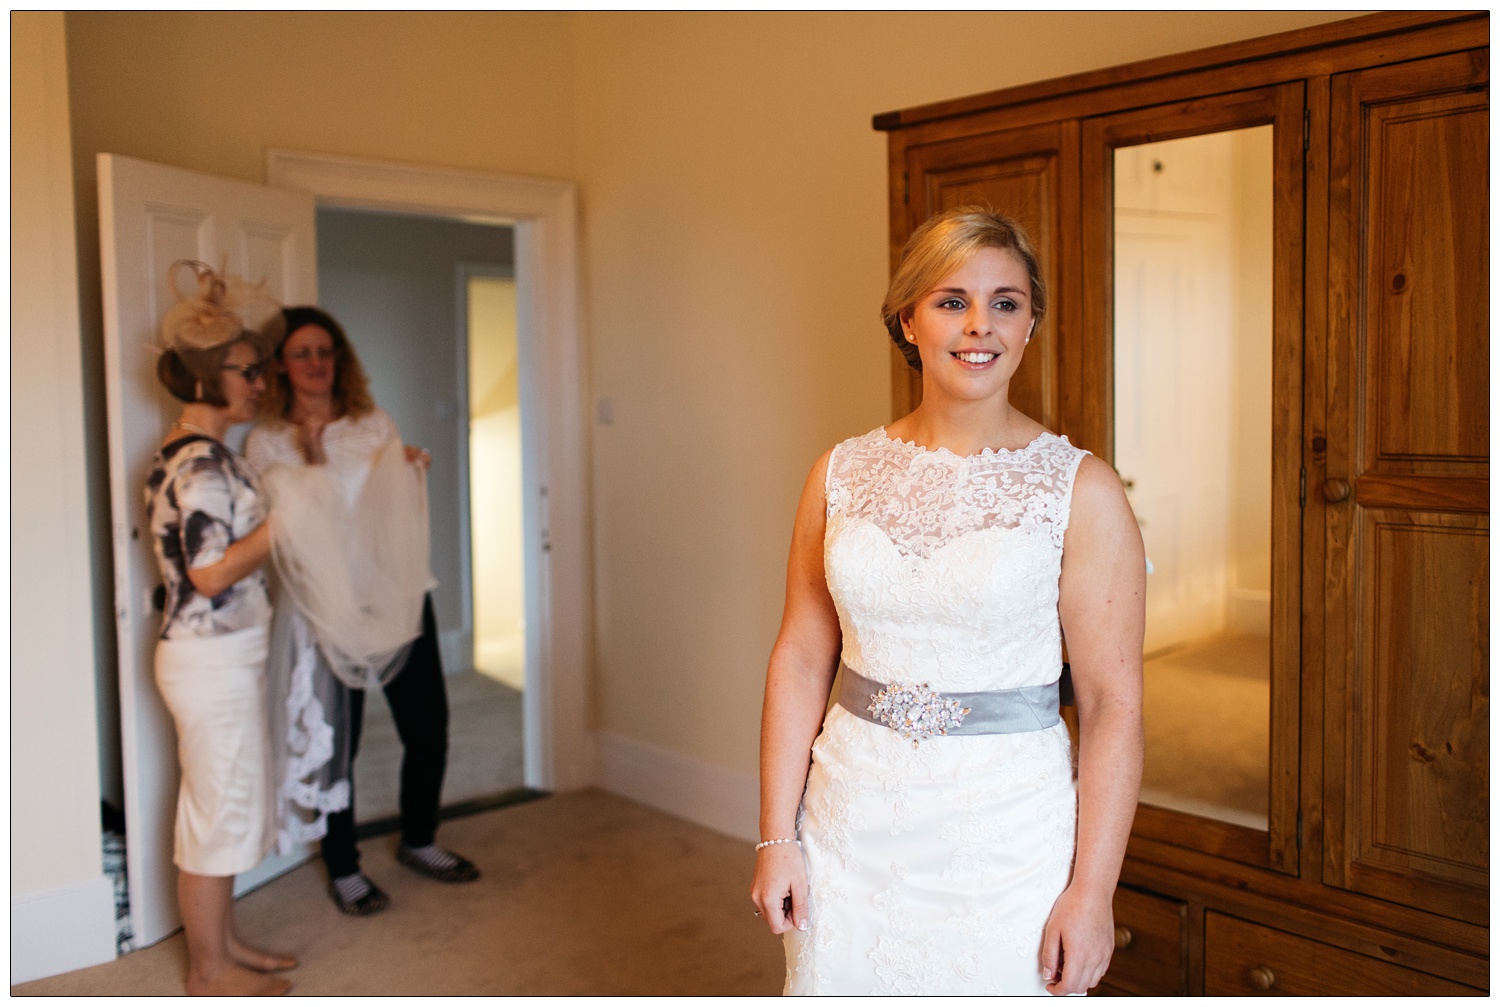 A bride stands in a bedroom in her dress. In the background two women ar holding the veil.